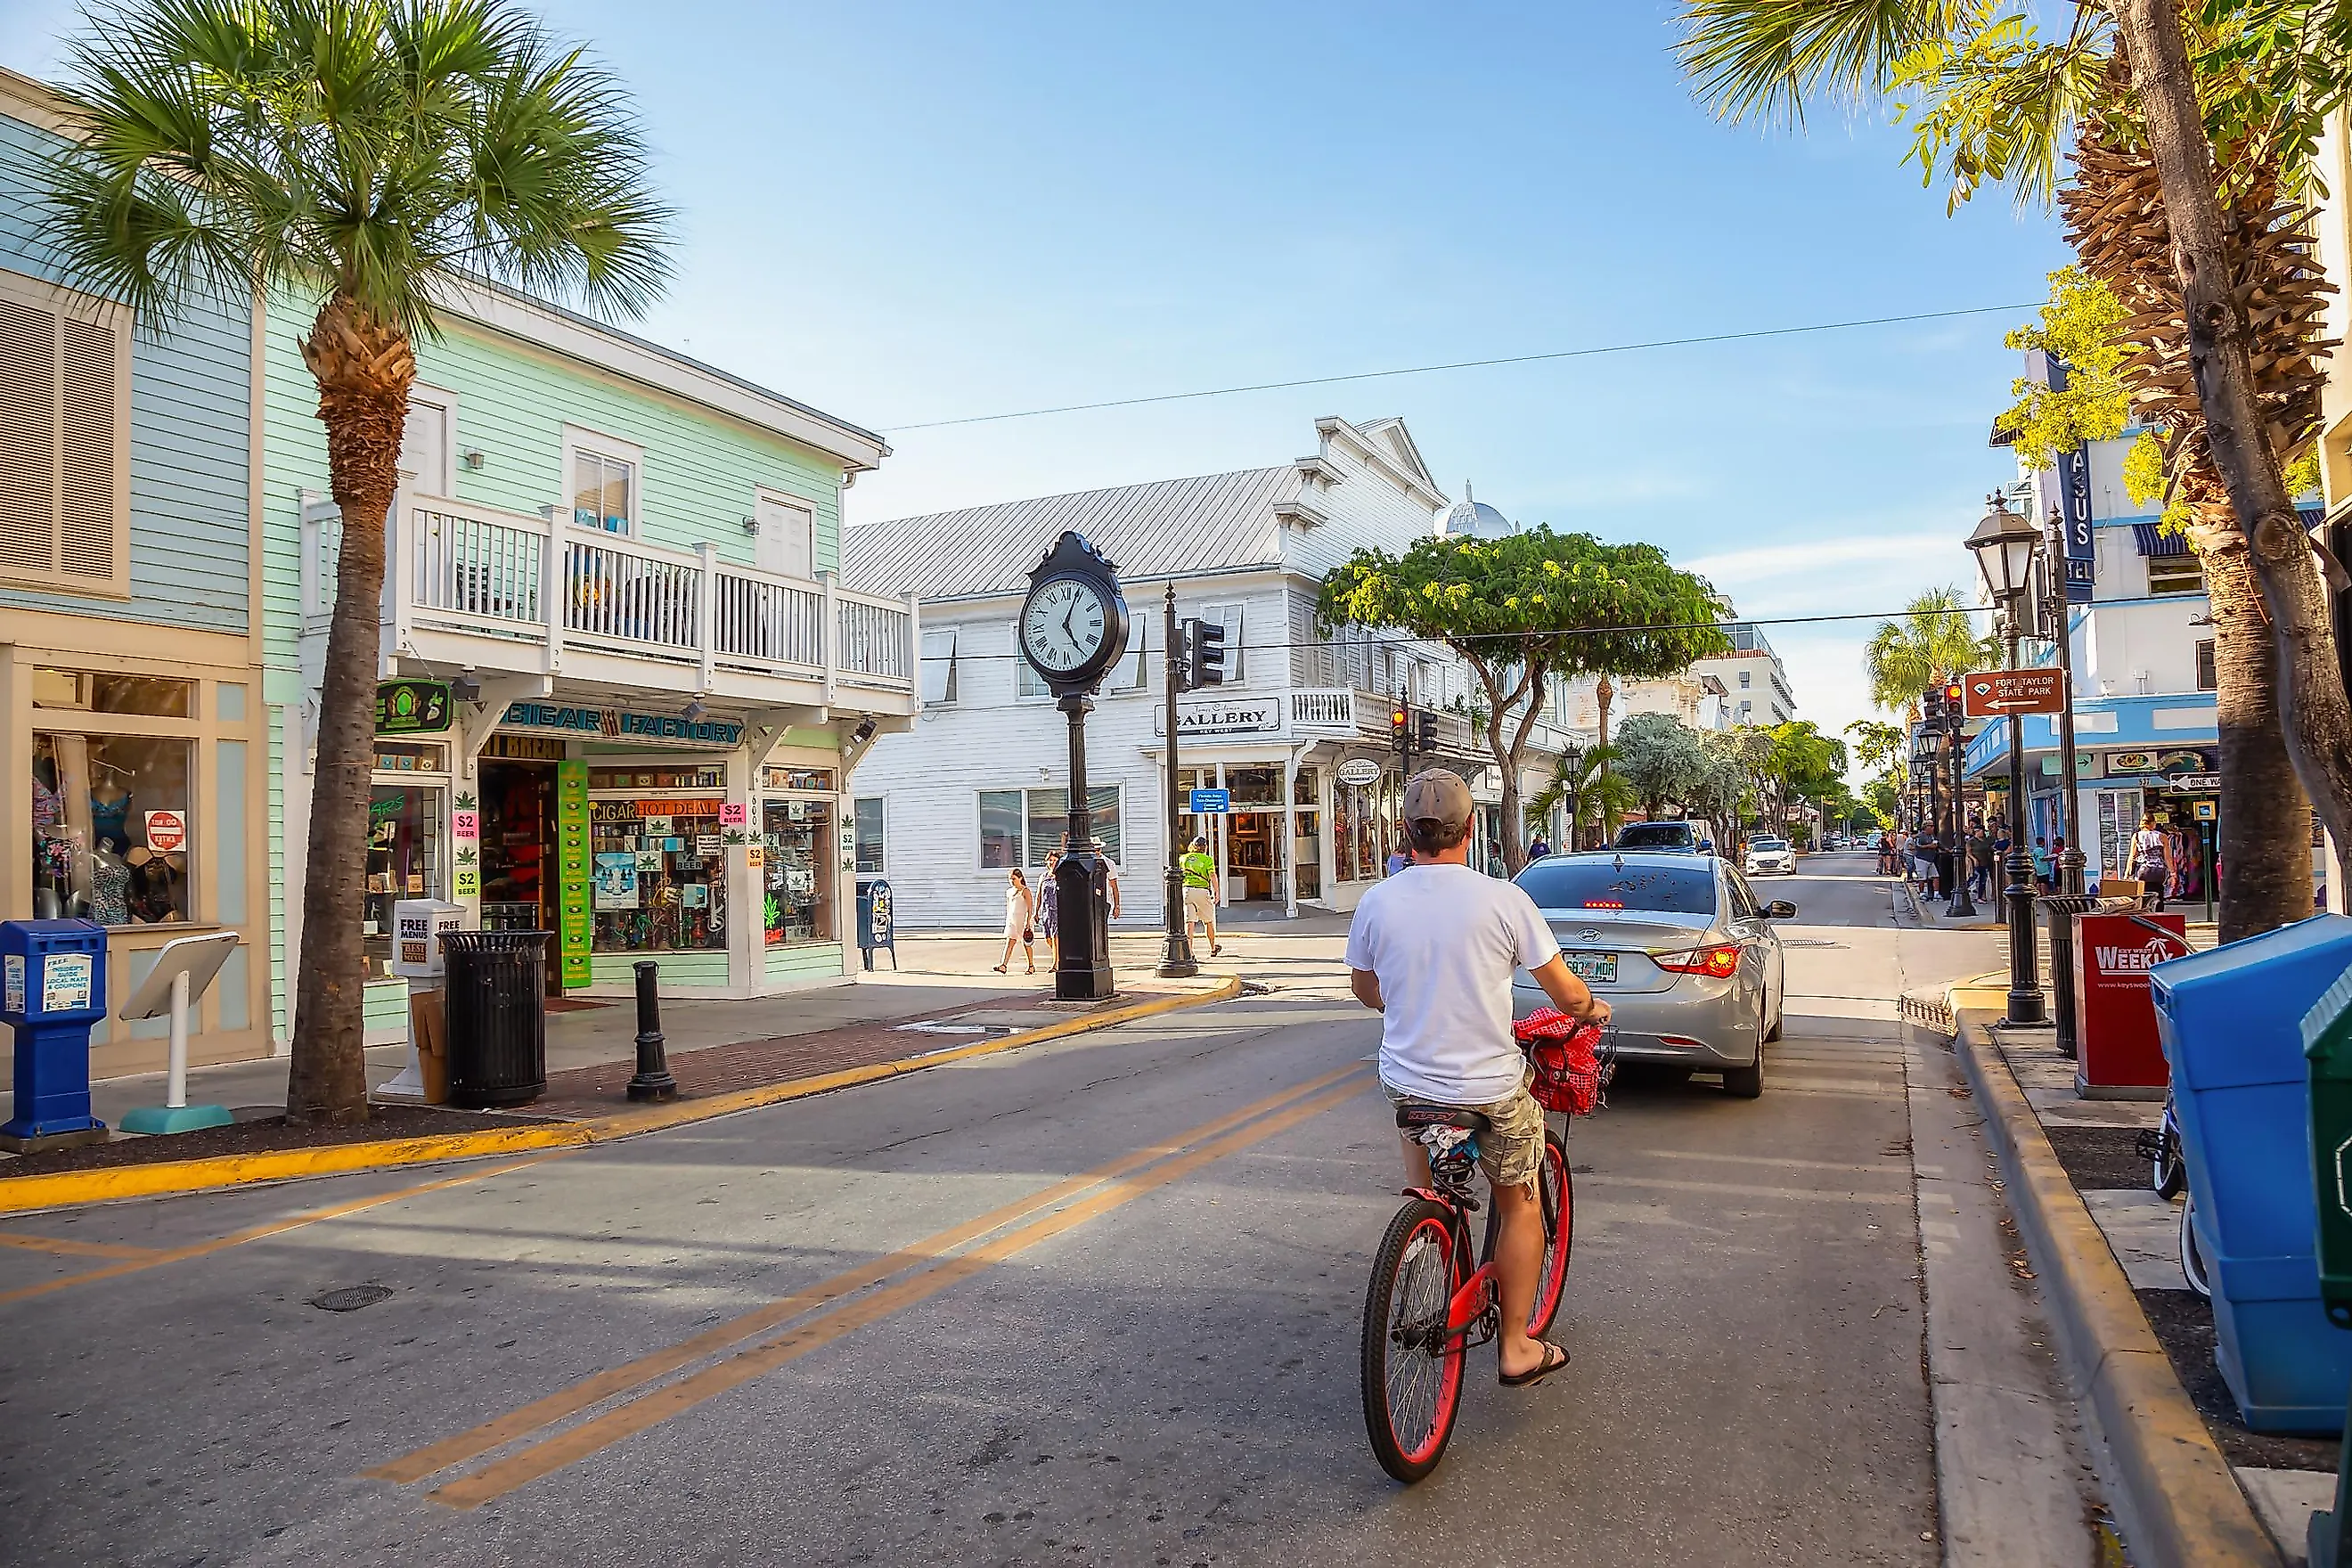 Street view of the Main Strip in the Downtown City where all the bars are located in Key West, Florida